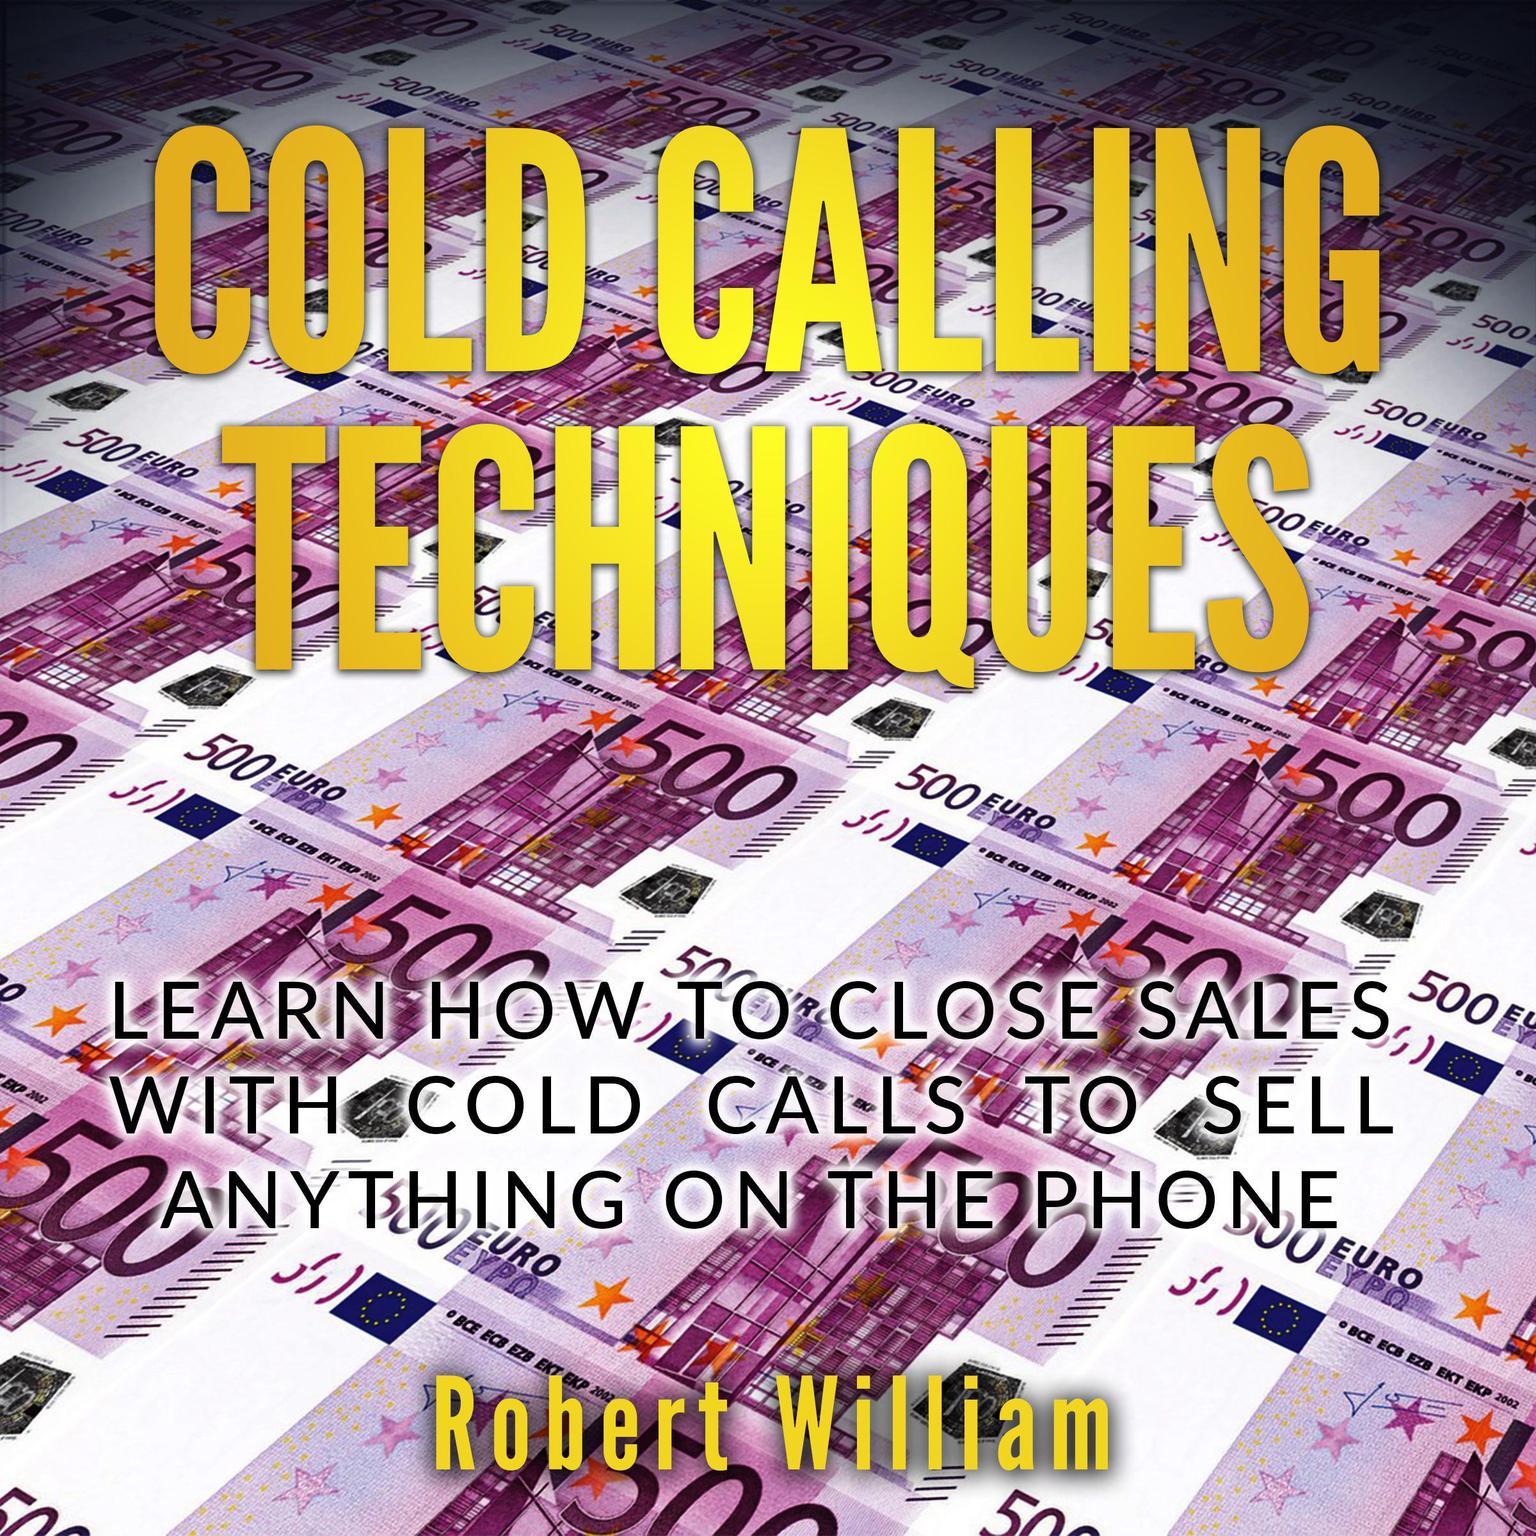 Cold Calling Techniques: Learn How to Close Sales with Cold Calls to Sell Anything on the Phone Audiobook, by Robert William